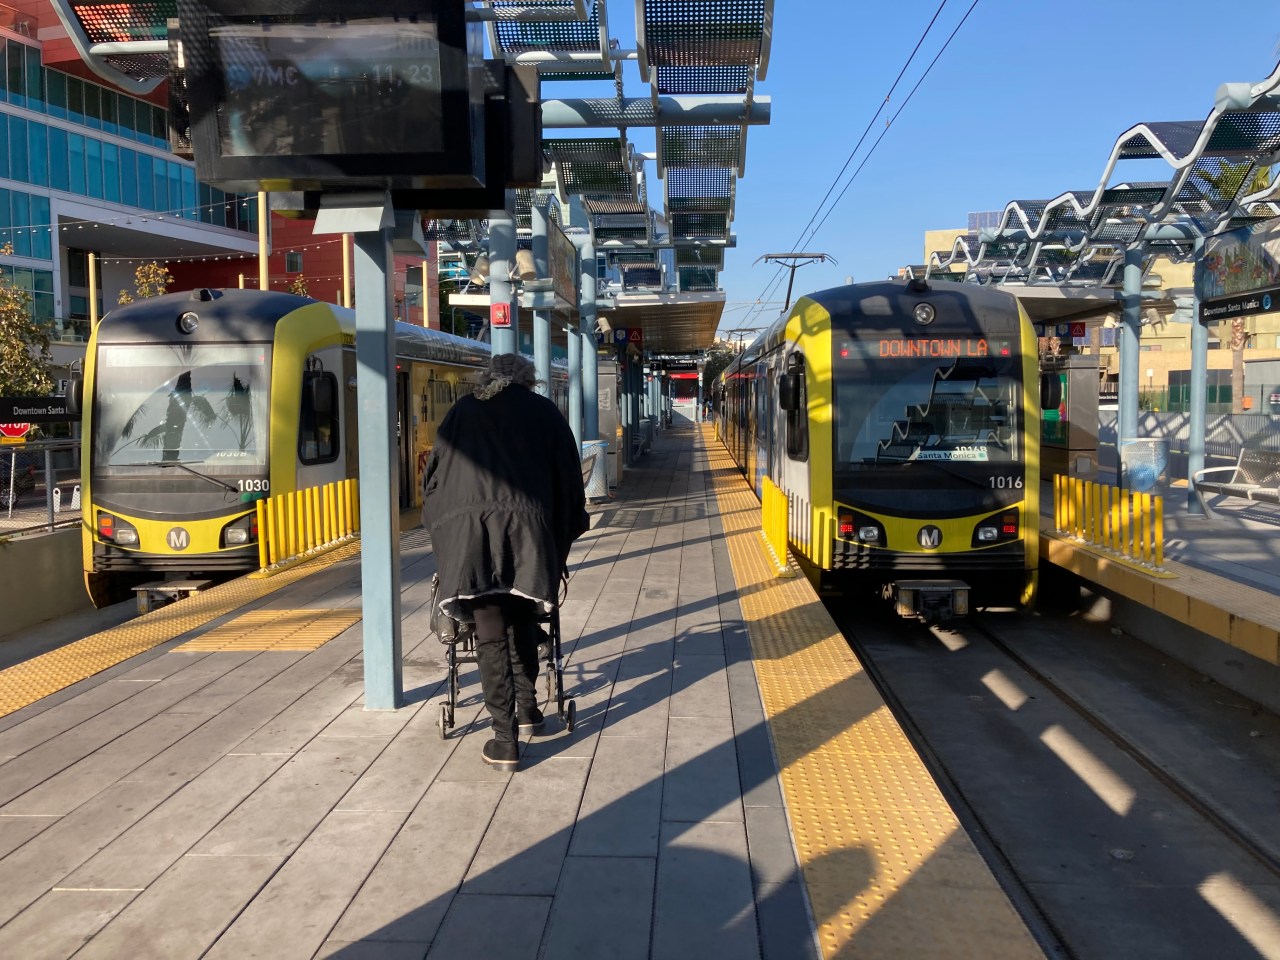 Catching the Blue Line at Downtown Santa Monica station. Photo: John Greenfield